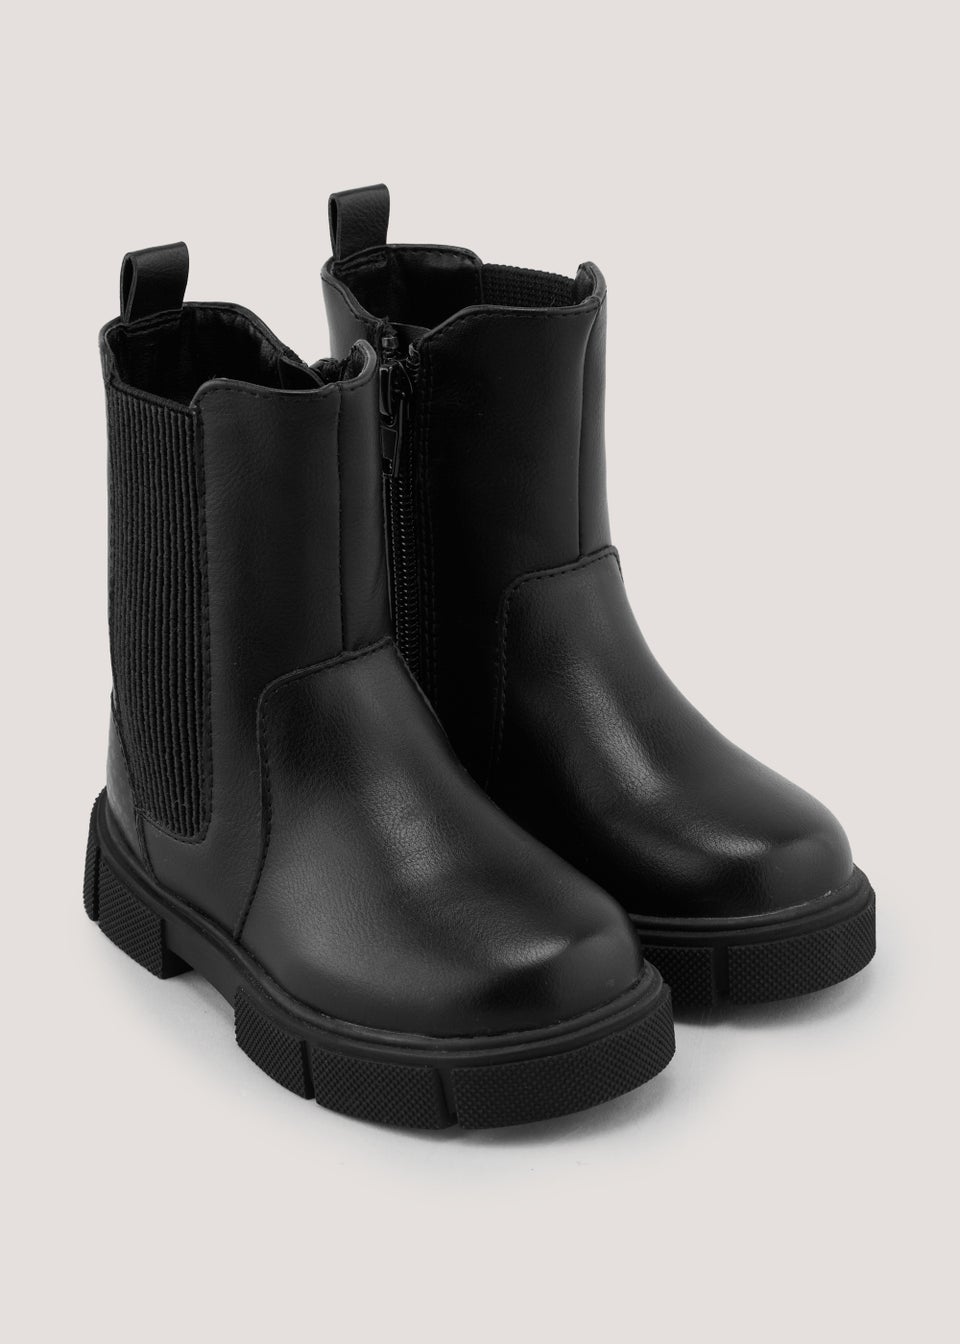 Girls Black Mid Calf Chelsea Boots (Younger 4-9)